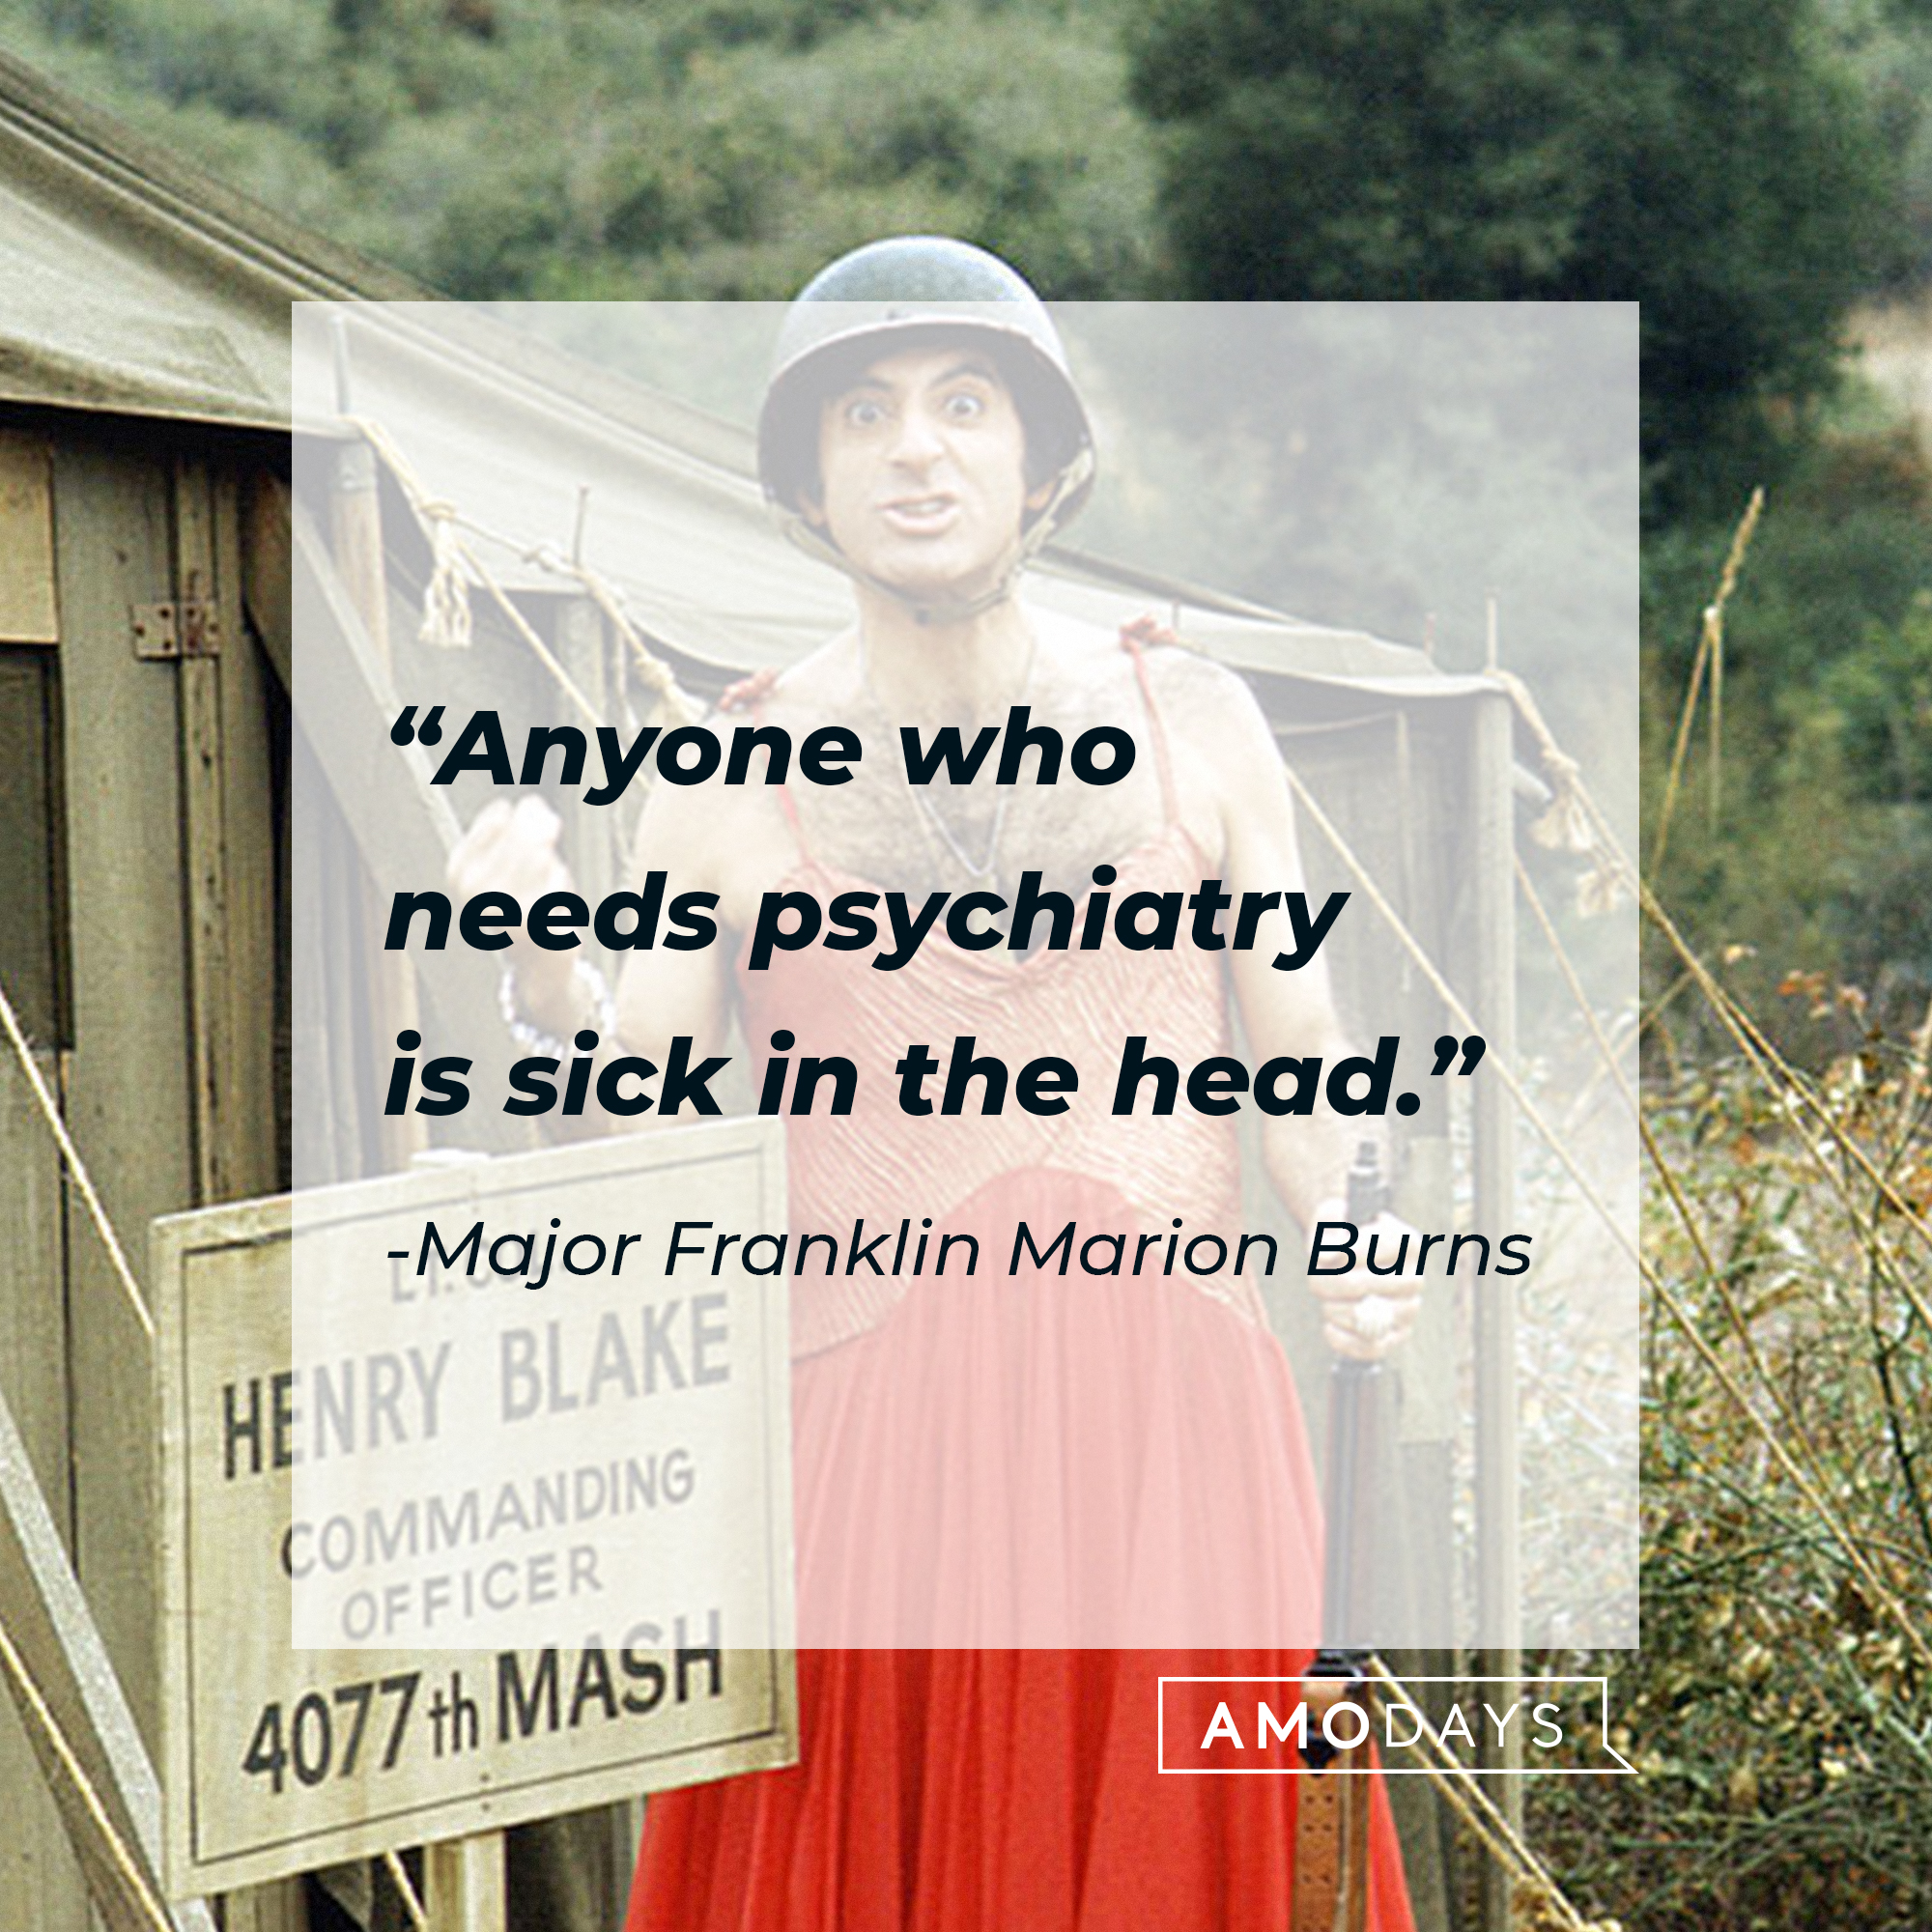 Major Franklin Marion Burns' quote: "Anyone who needs psychiatry is sick in the head." | Source: Getty Images